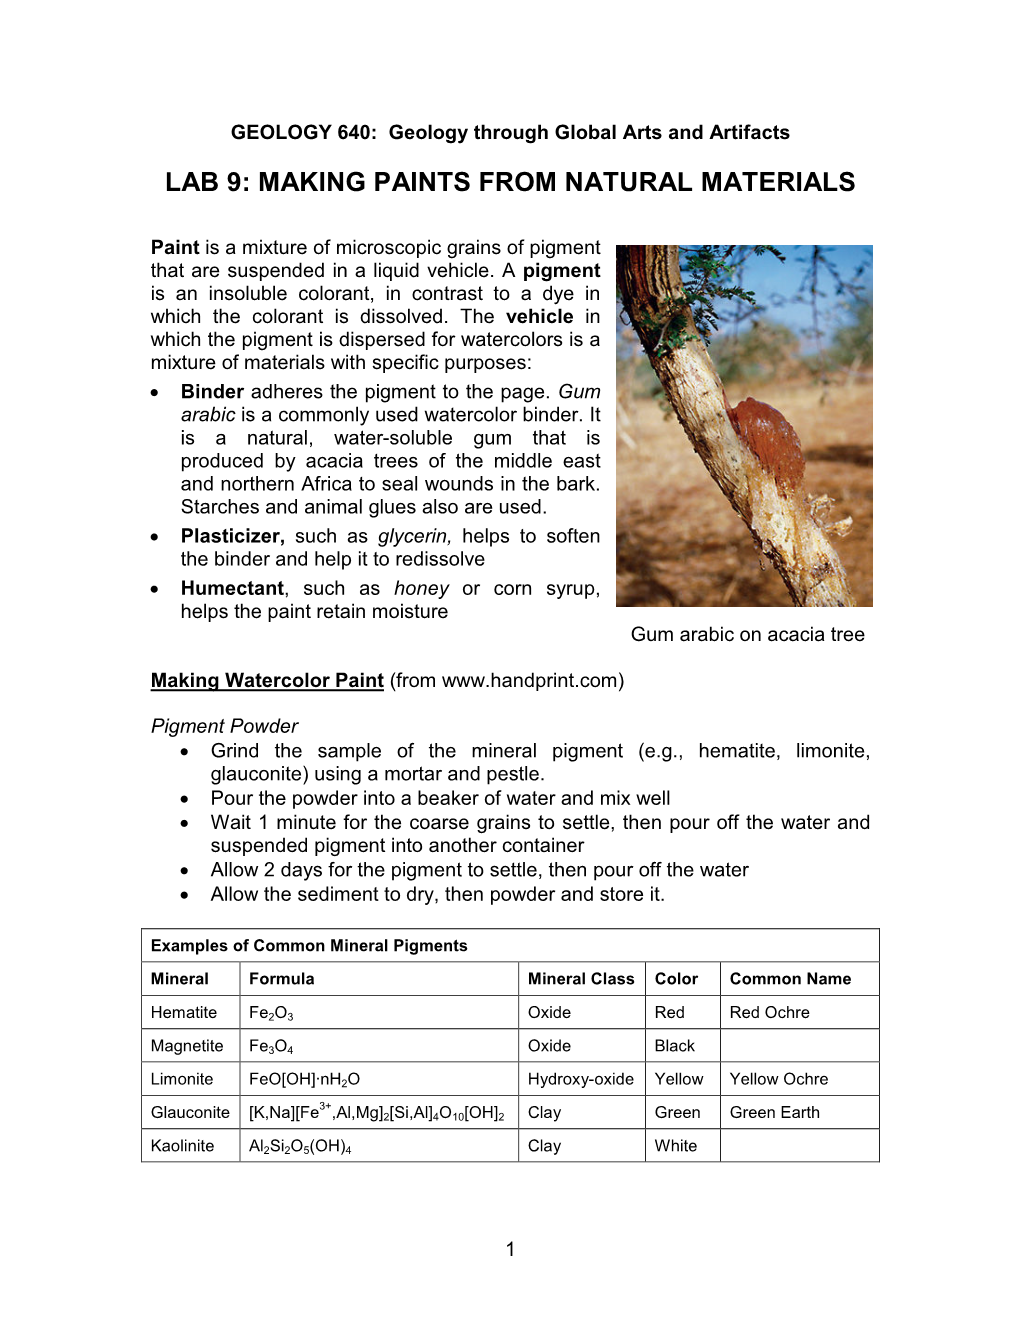 Lab 9: Making Paints from Natural Materials